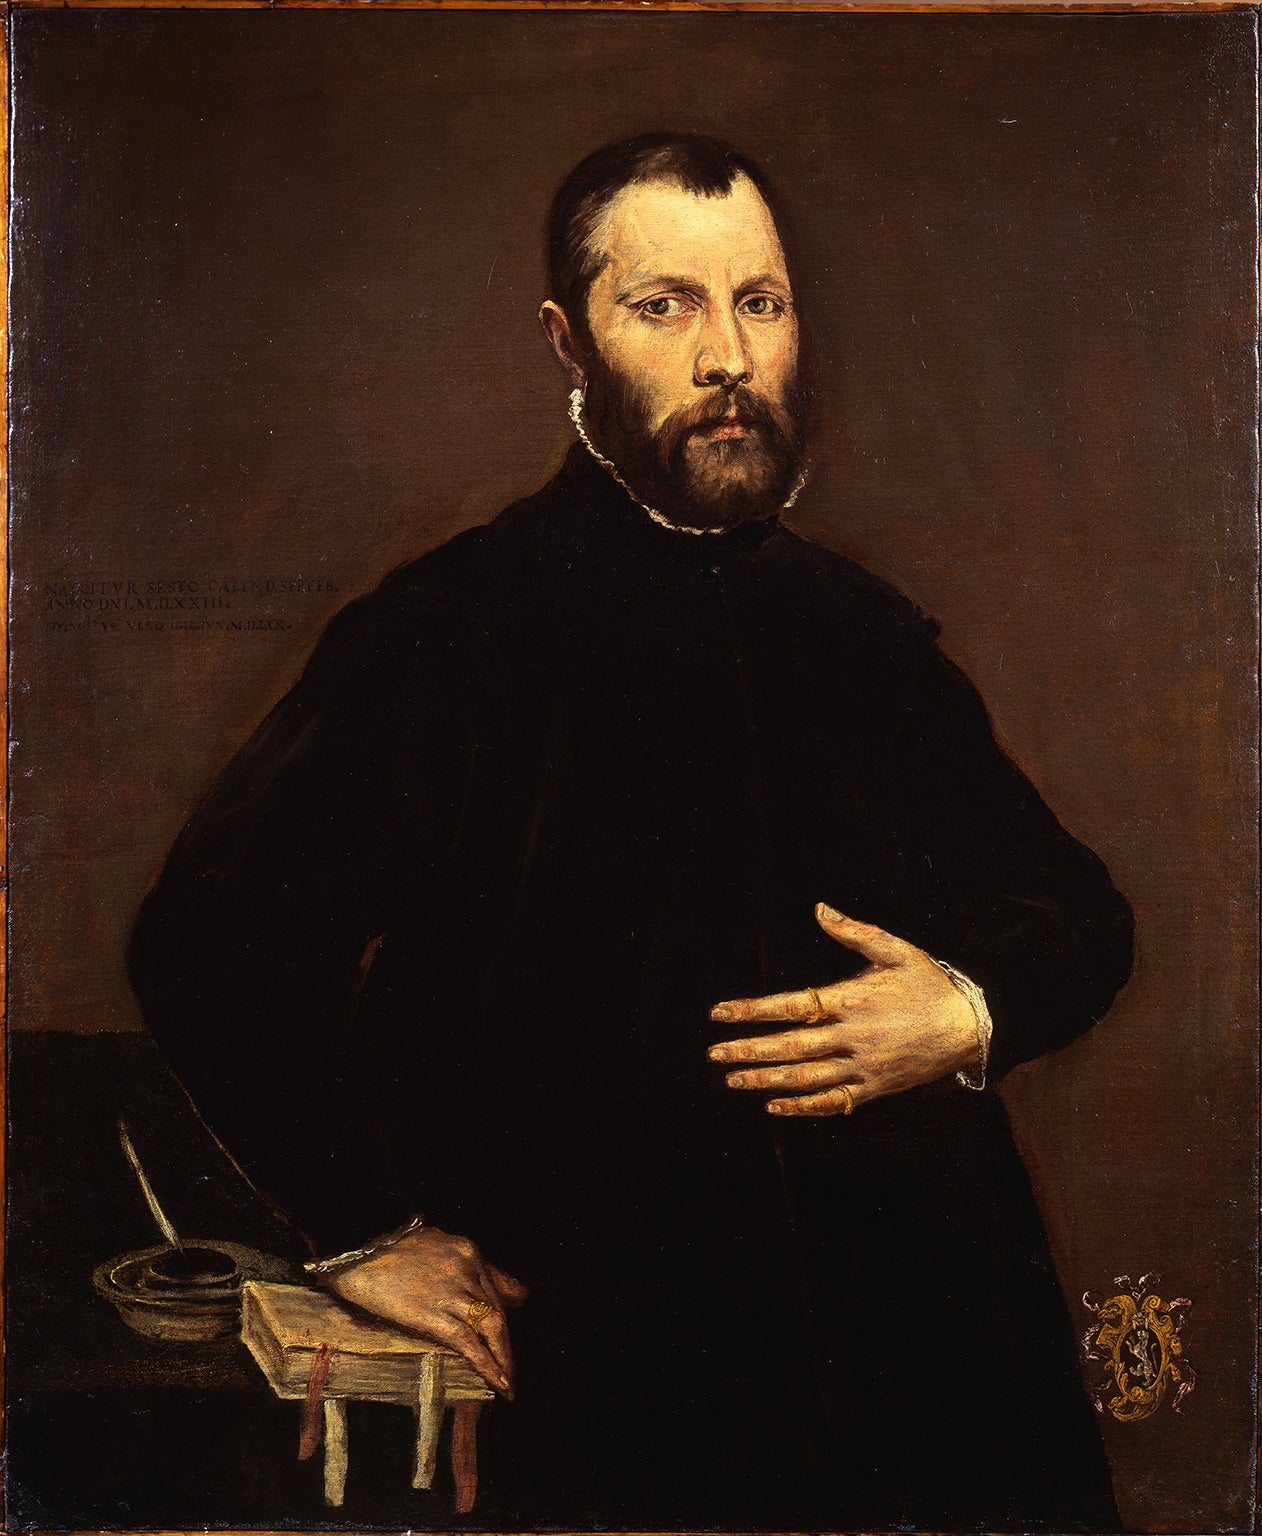 El Greco’s Portrait of a Gentleman was recovered with the help of ARG last year